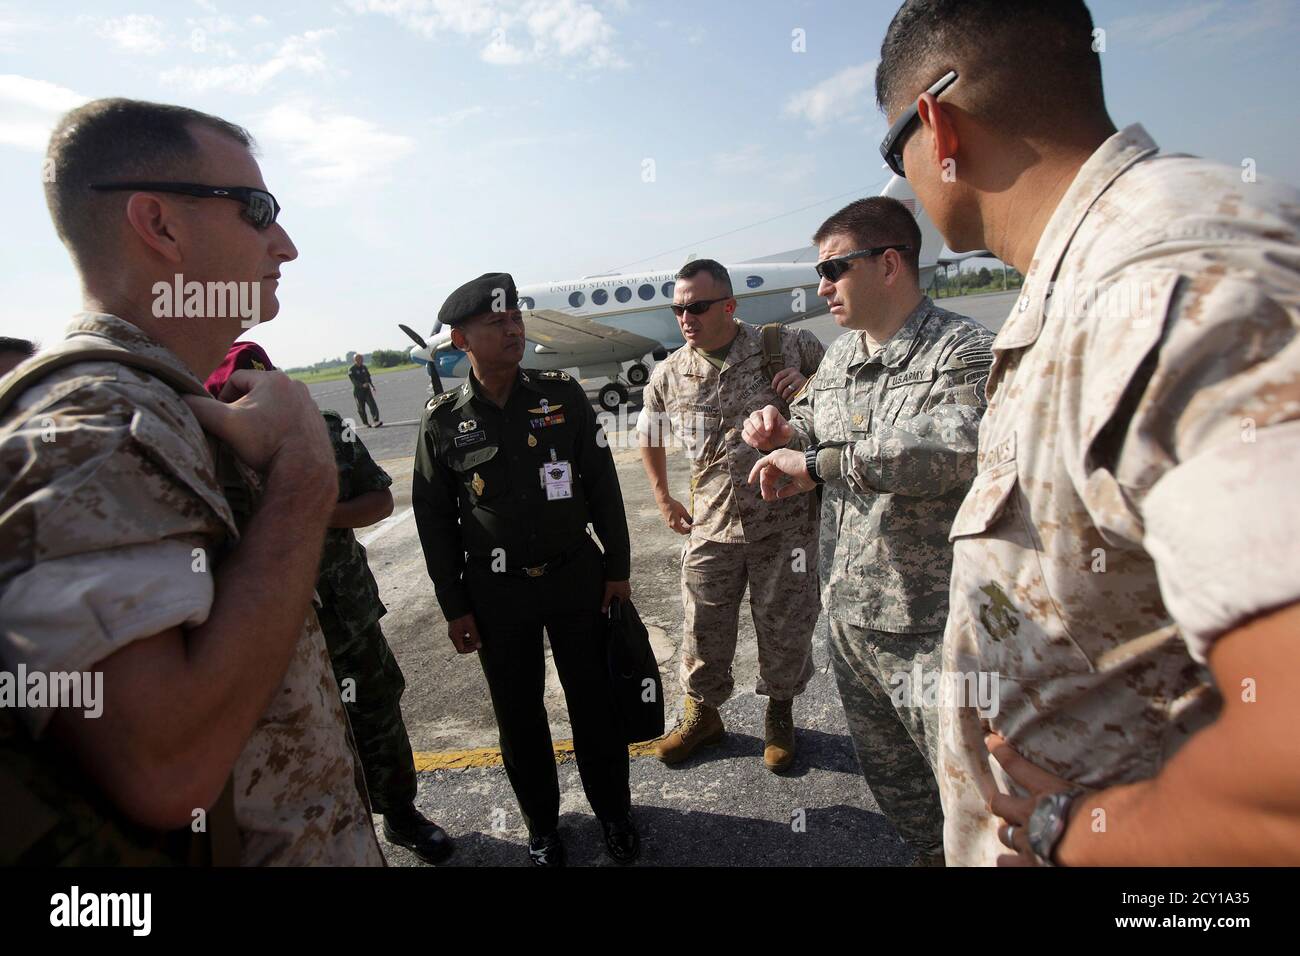 Colonel John A. Ostrowski (L), Lt Col. Bob Vietas (C), Lt Col. Michael Pelak (R) of the U.S. Marine Expeditionary Force and Major J.C. 'Lumpy' Lumbaca of the U.S. Army Special Forces (2nd R) talk to Thai Royal Army officers as they arrive in a military airport to view the flooding situation in Lopburi, central Thailand October 18, 2011. The group of U.S. marines arrived to Thailand to offer their assistance in coping with the worst flooding in 50 years that killed at least 315 people since July, damaged large areas of farmland and closed huge industrial estates this month.    REUTERS/Dario Pig Stock Photo